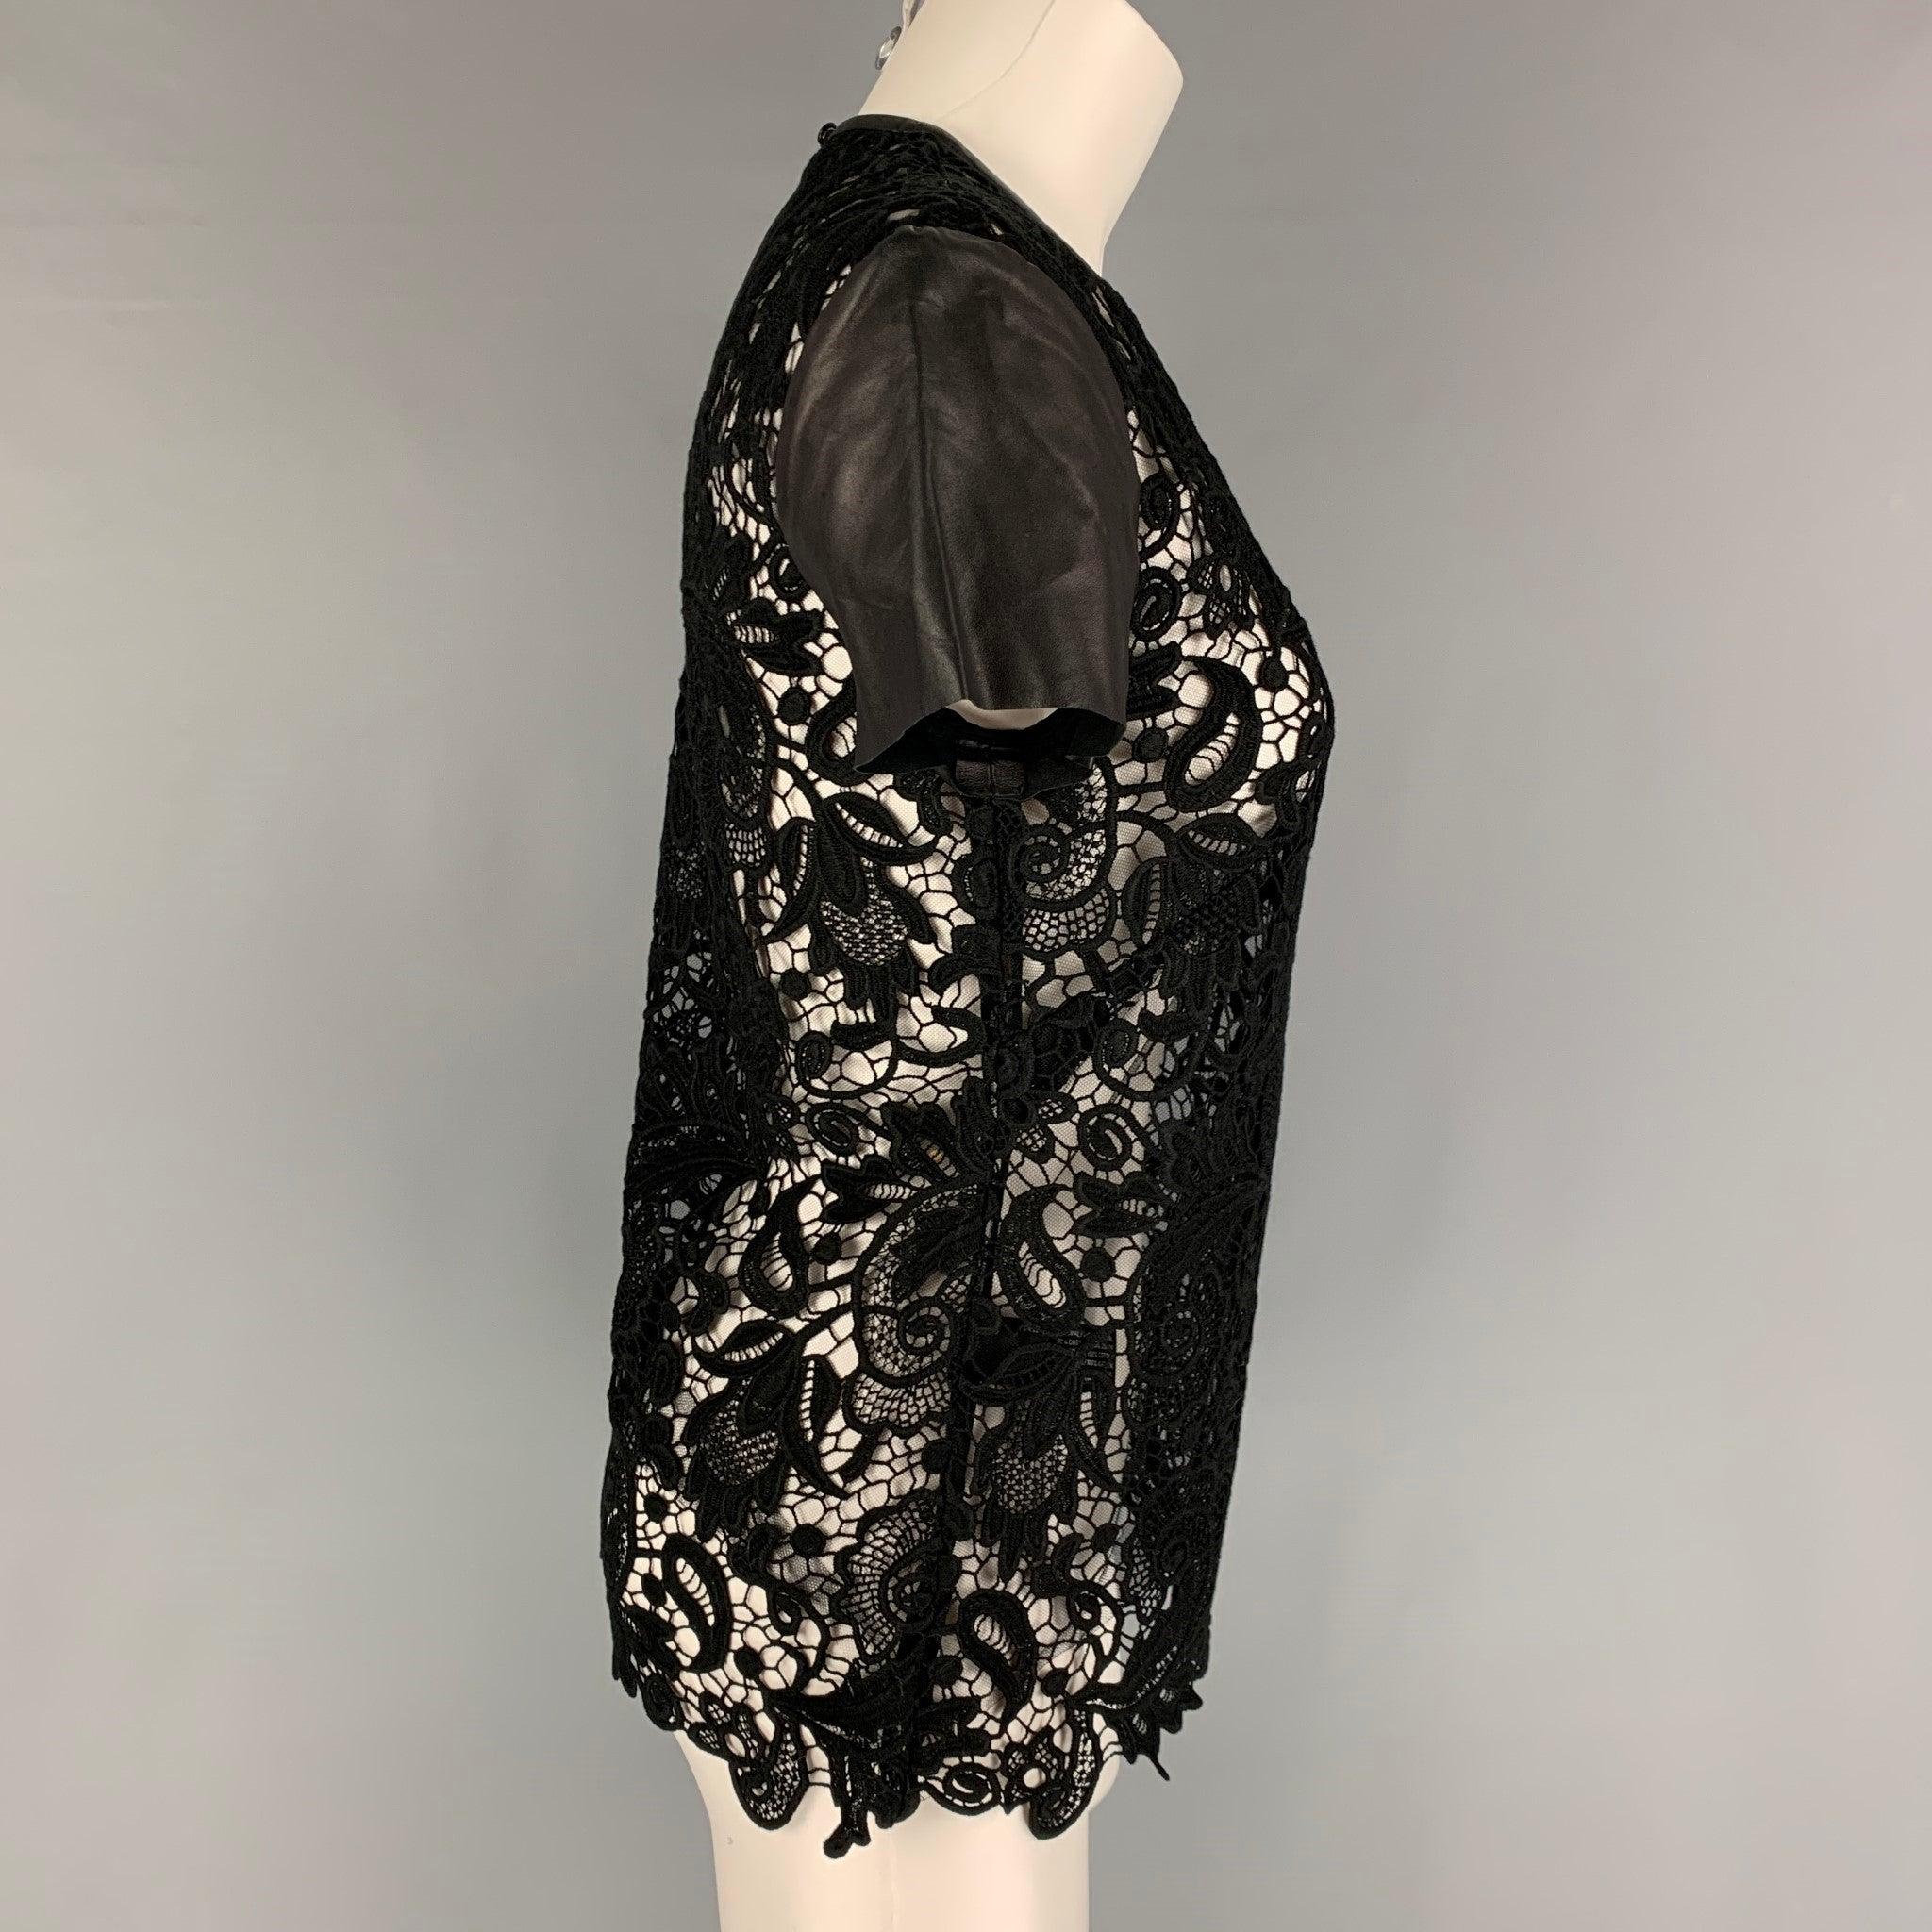 RALPH LAUREN 'Black Label' blouse comes in a black see through lace cotton featuring leather sleeves and a back button closure.
Very Good
Pre-Owned Condition. 

Marked:   4 

Measurements: 
 
Shoulder: 15.5 inches  Bust: 32 inches  Sleeve: 6 inches 